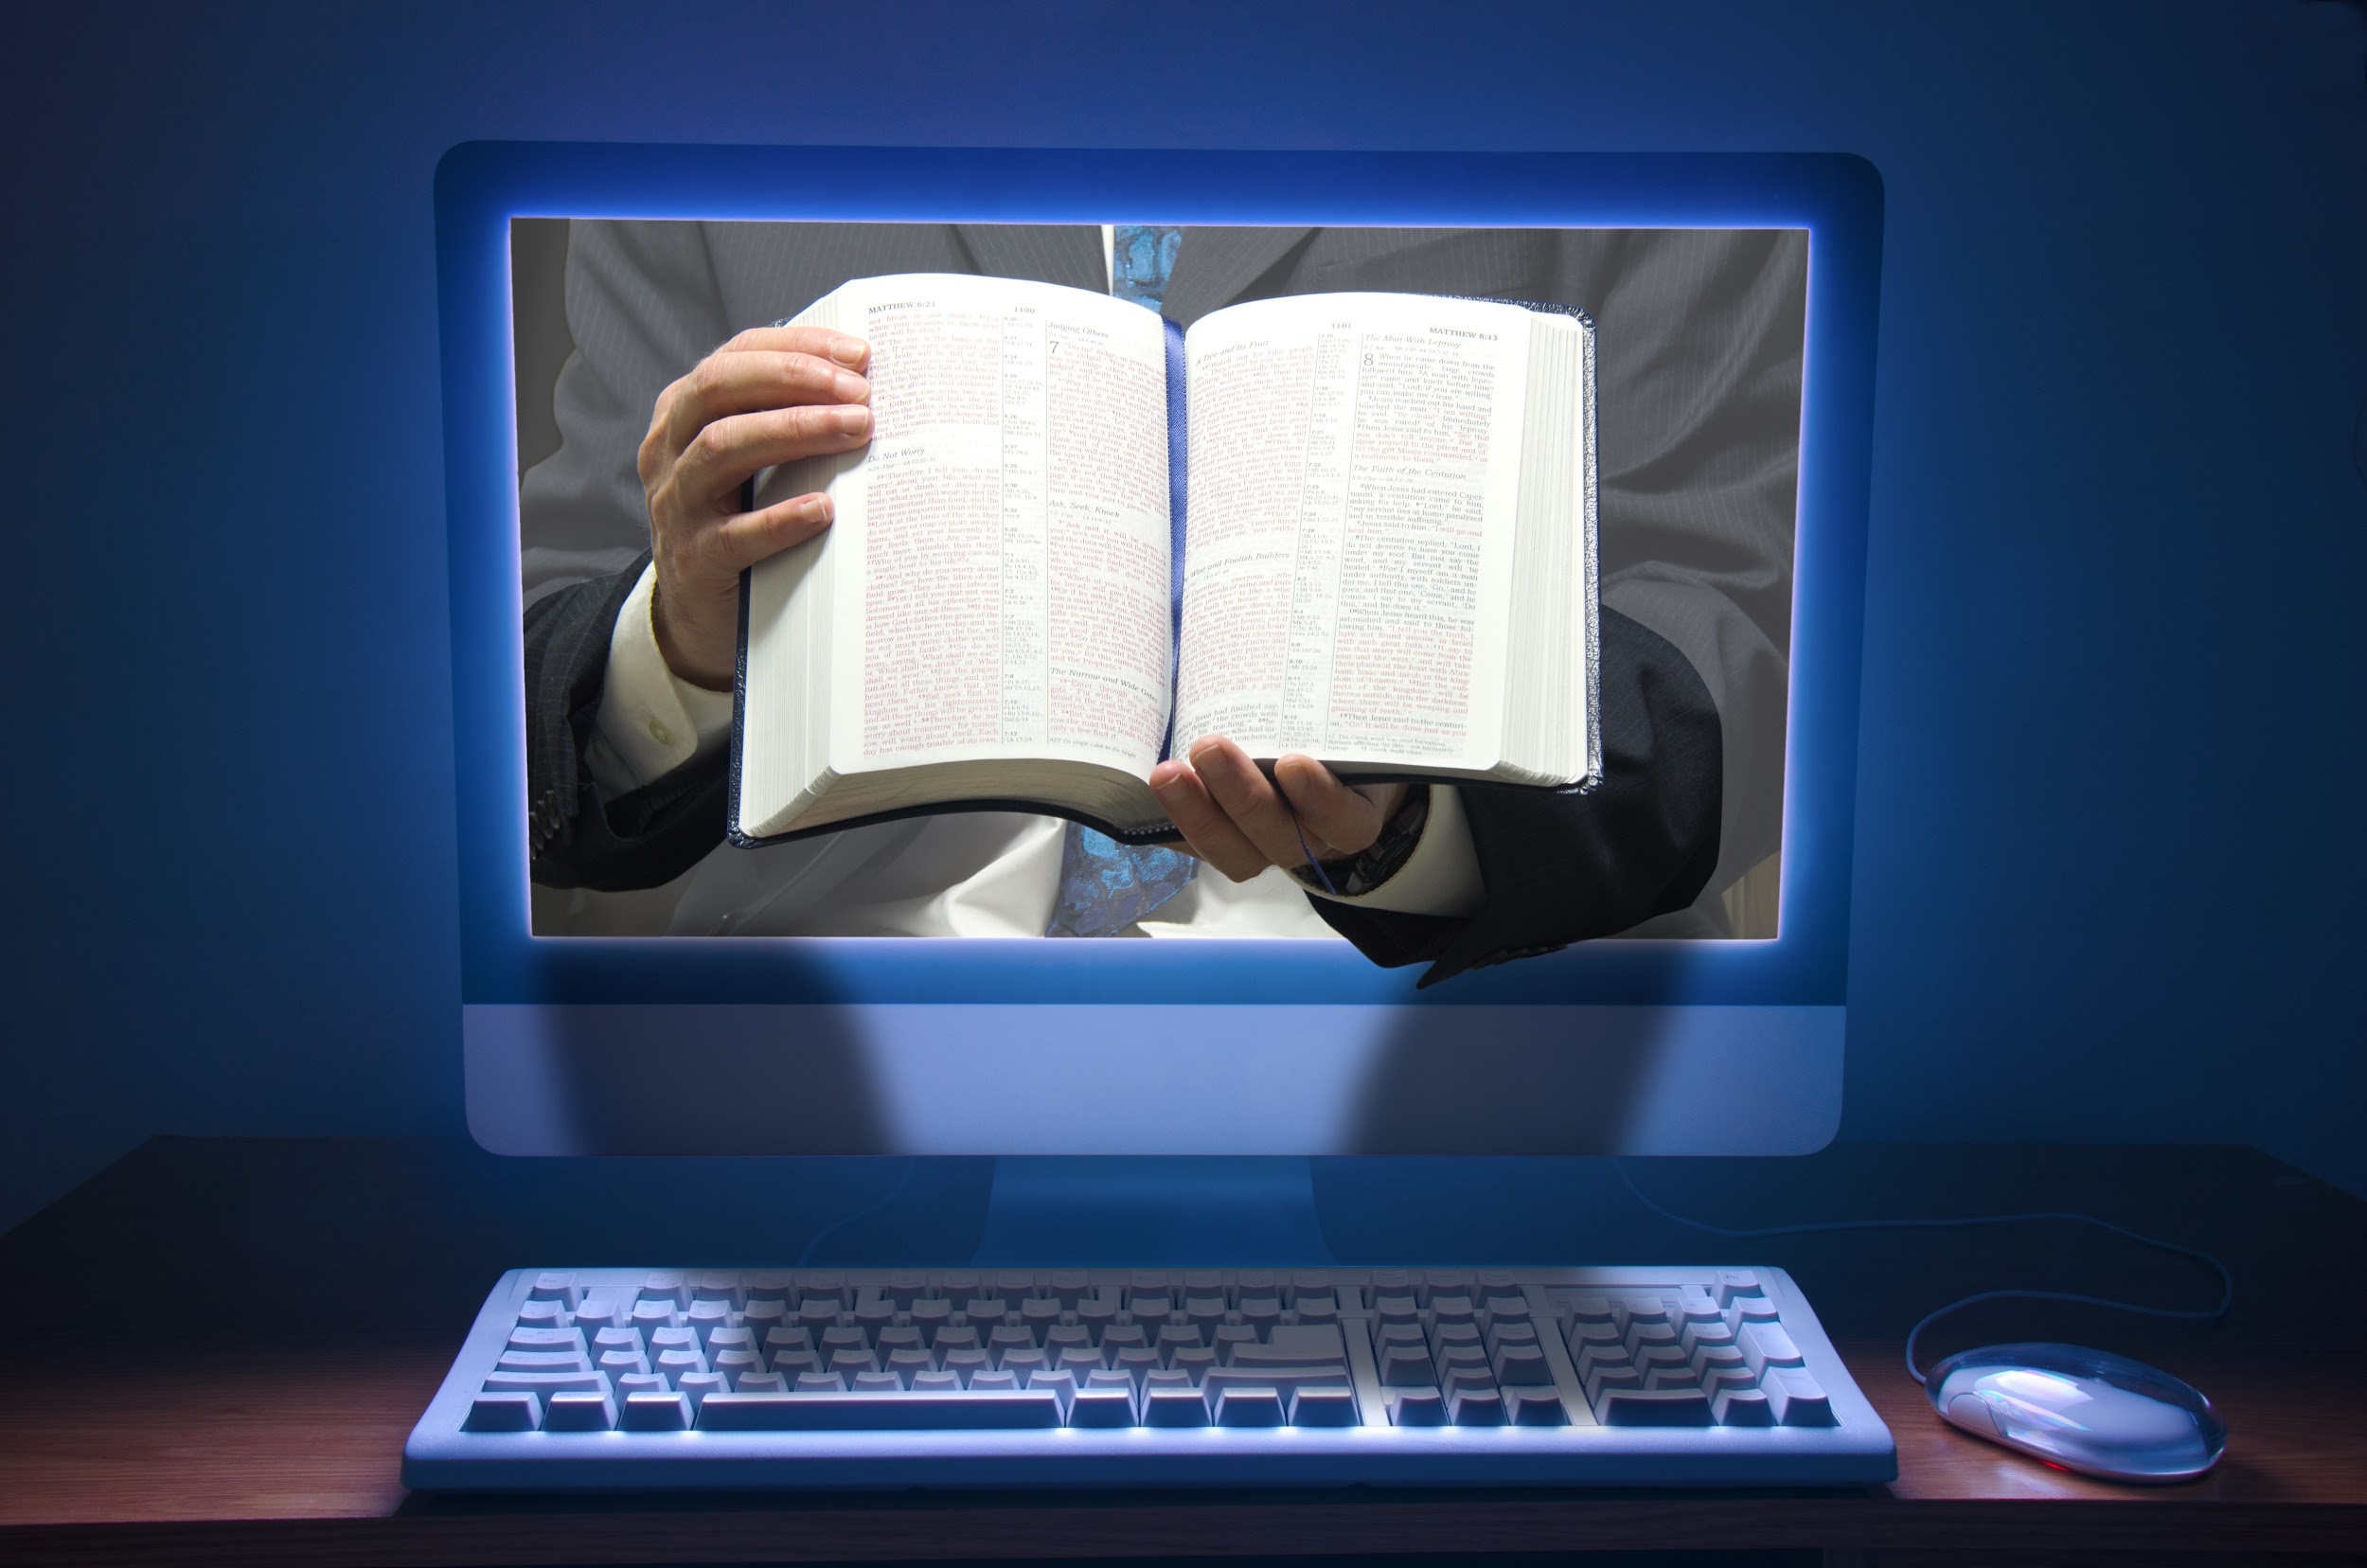 computer with a man showing a bible through the screen